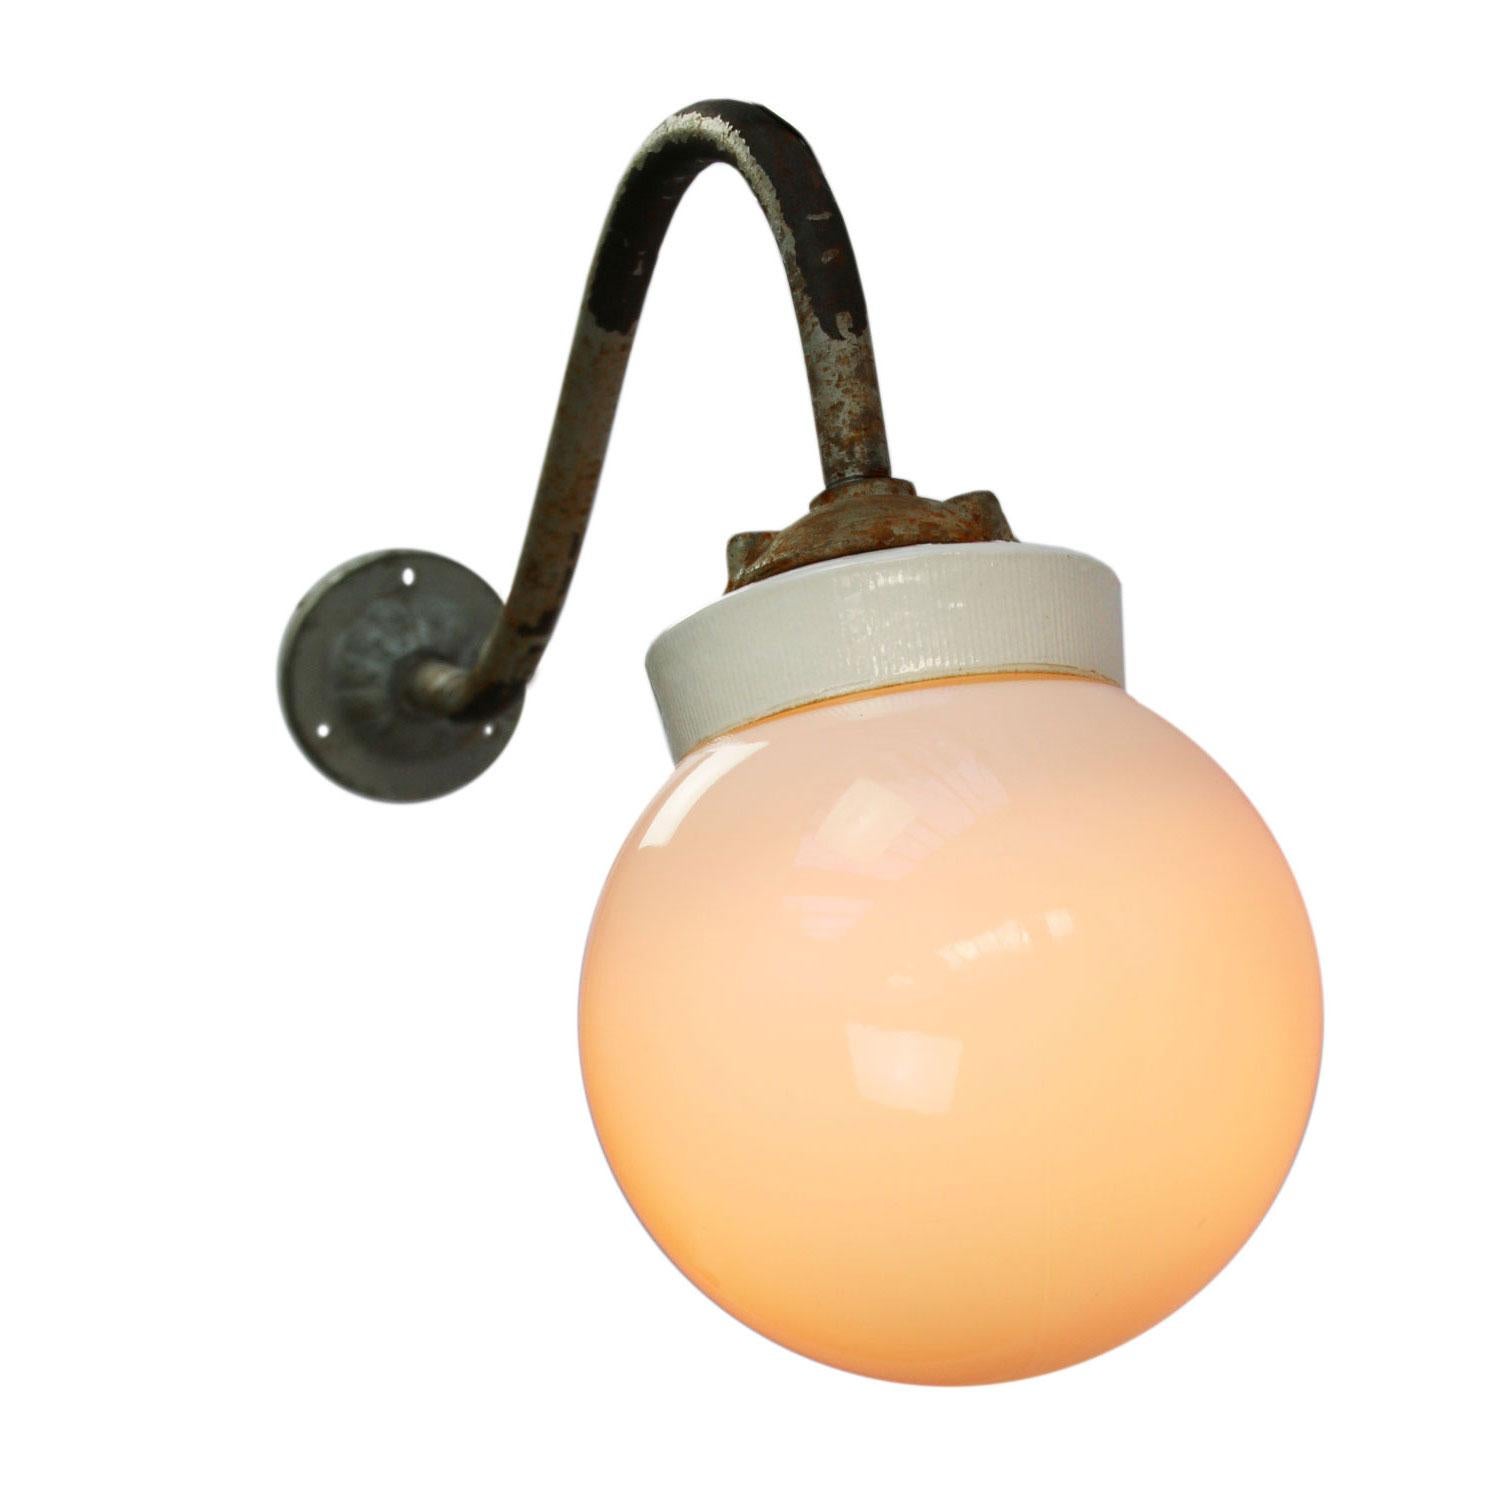 Industrial wall light.
Cast iron and porcelain top, white opaline glass.
Diameter cast iron wall mount: 9 cm, 3 holes to secure.

Weight: 2.00 kg / 4.4 lb

Priced per individual item. All lamps have been made suitable by international standards for